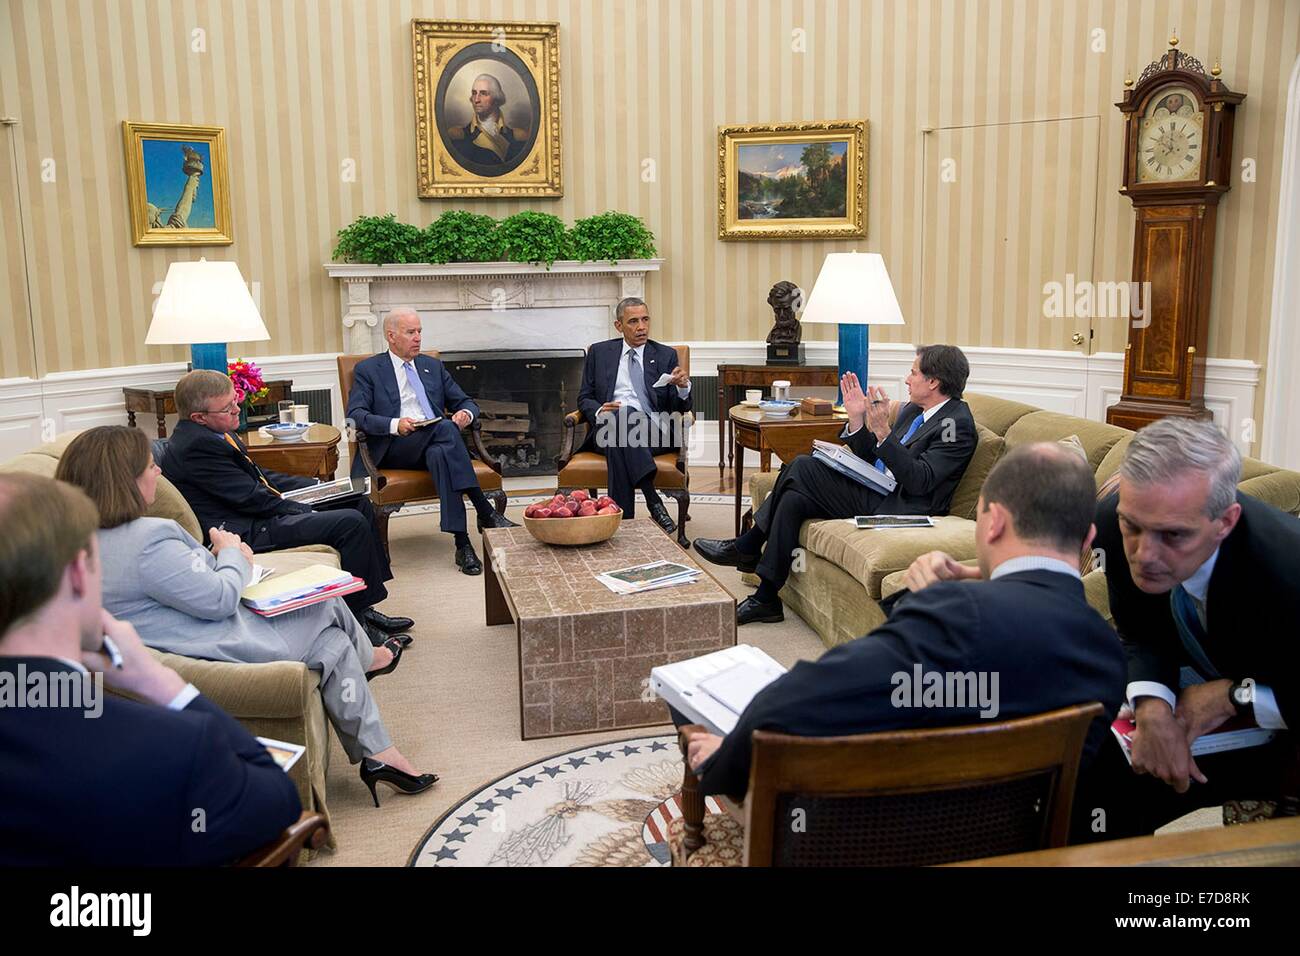 US President Barack Obama and Vice President Joe Biden receive the Presidential Daily Briefing as Chief of Staff Denis McDonough, right, confers with Ben Rhodes, Deputy National Security Advisor for Strategic Communications, in the Oval Office of the White House July 18, 2014 in Washington, DC. Stock Photo